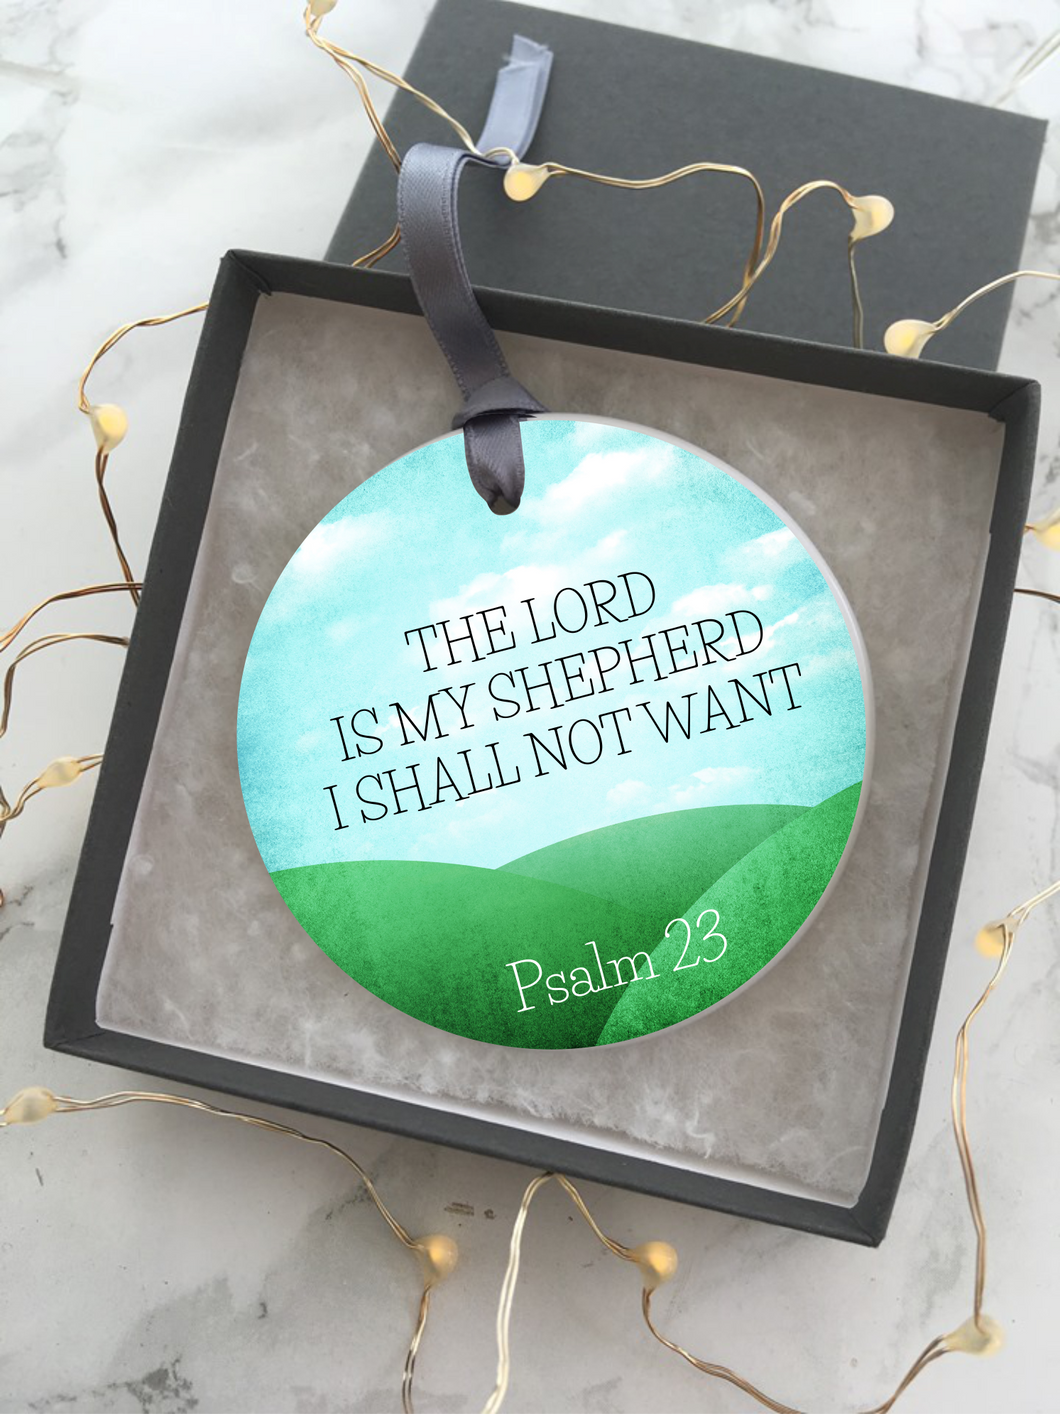 Psalm 23 The Lord Is My Shepherd - Religious Gift - Ceramic Hanging Decoration